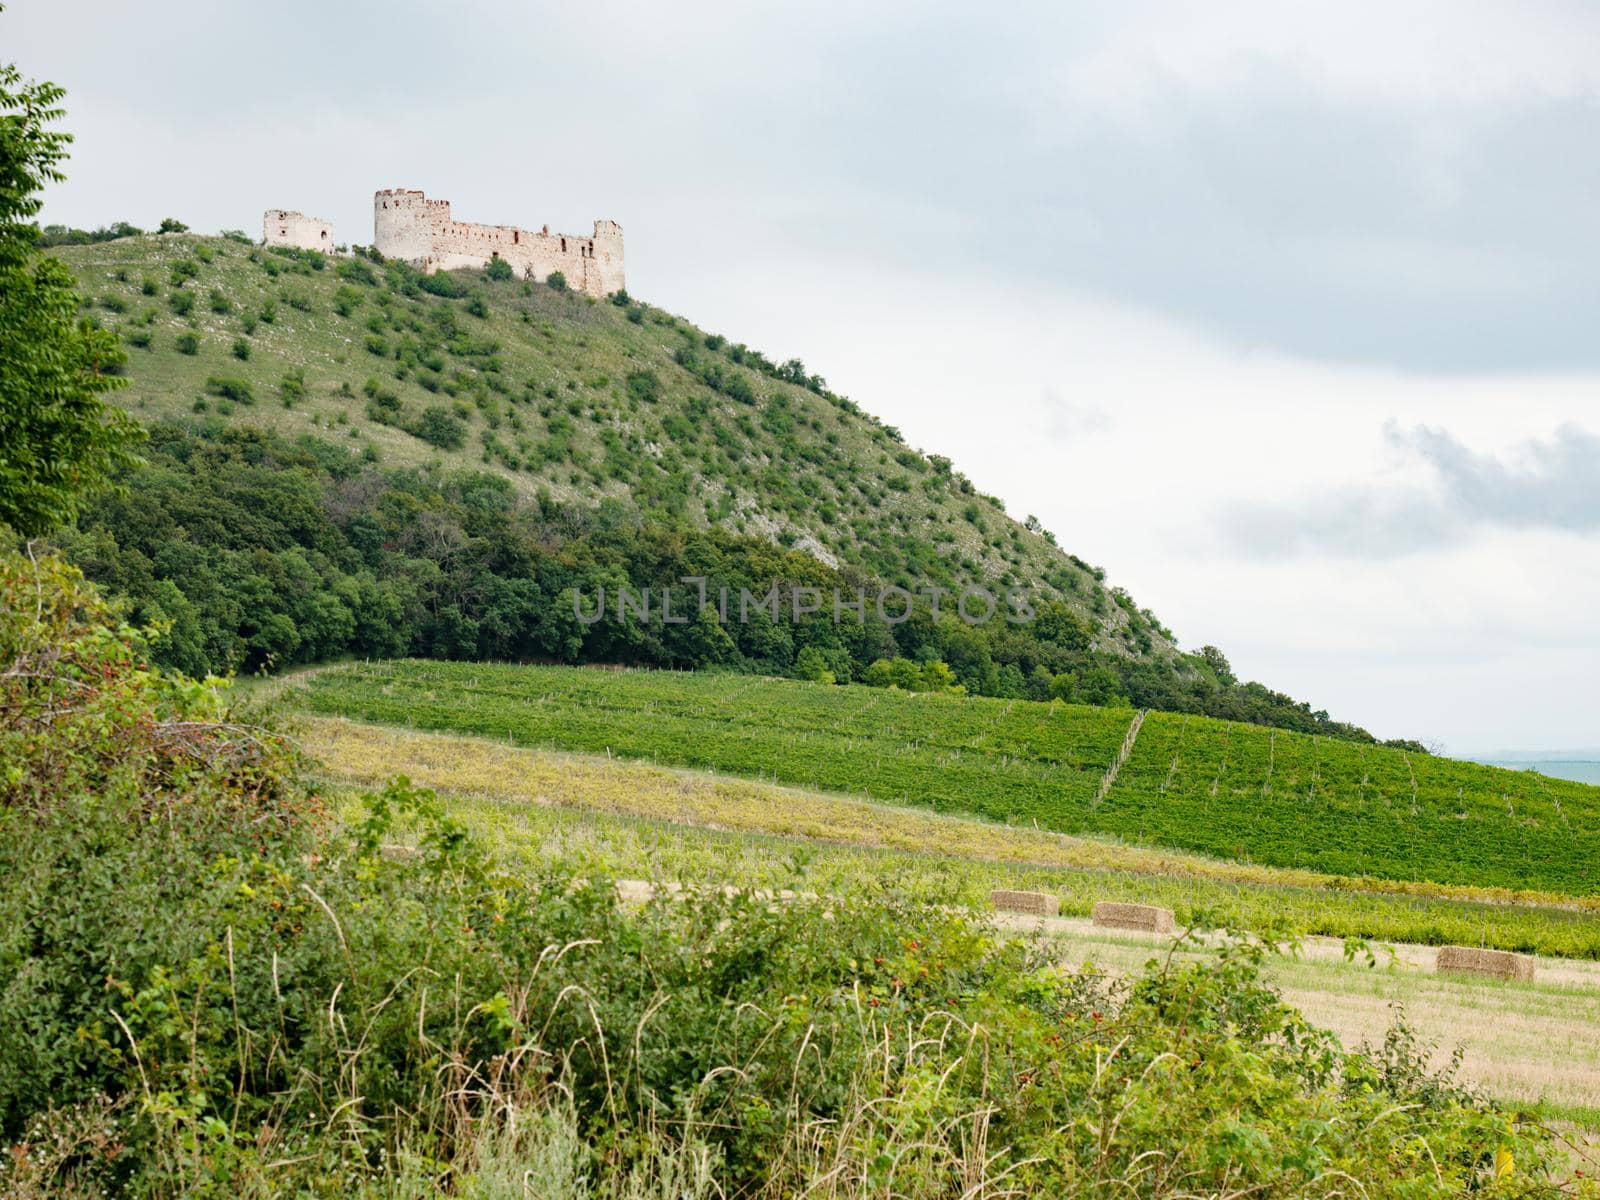 Devin Hill with the rest of Devicky castle above field and vineyard. Sunny summer day spent in South Moravia region, Czechia.